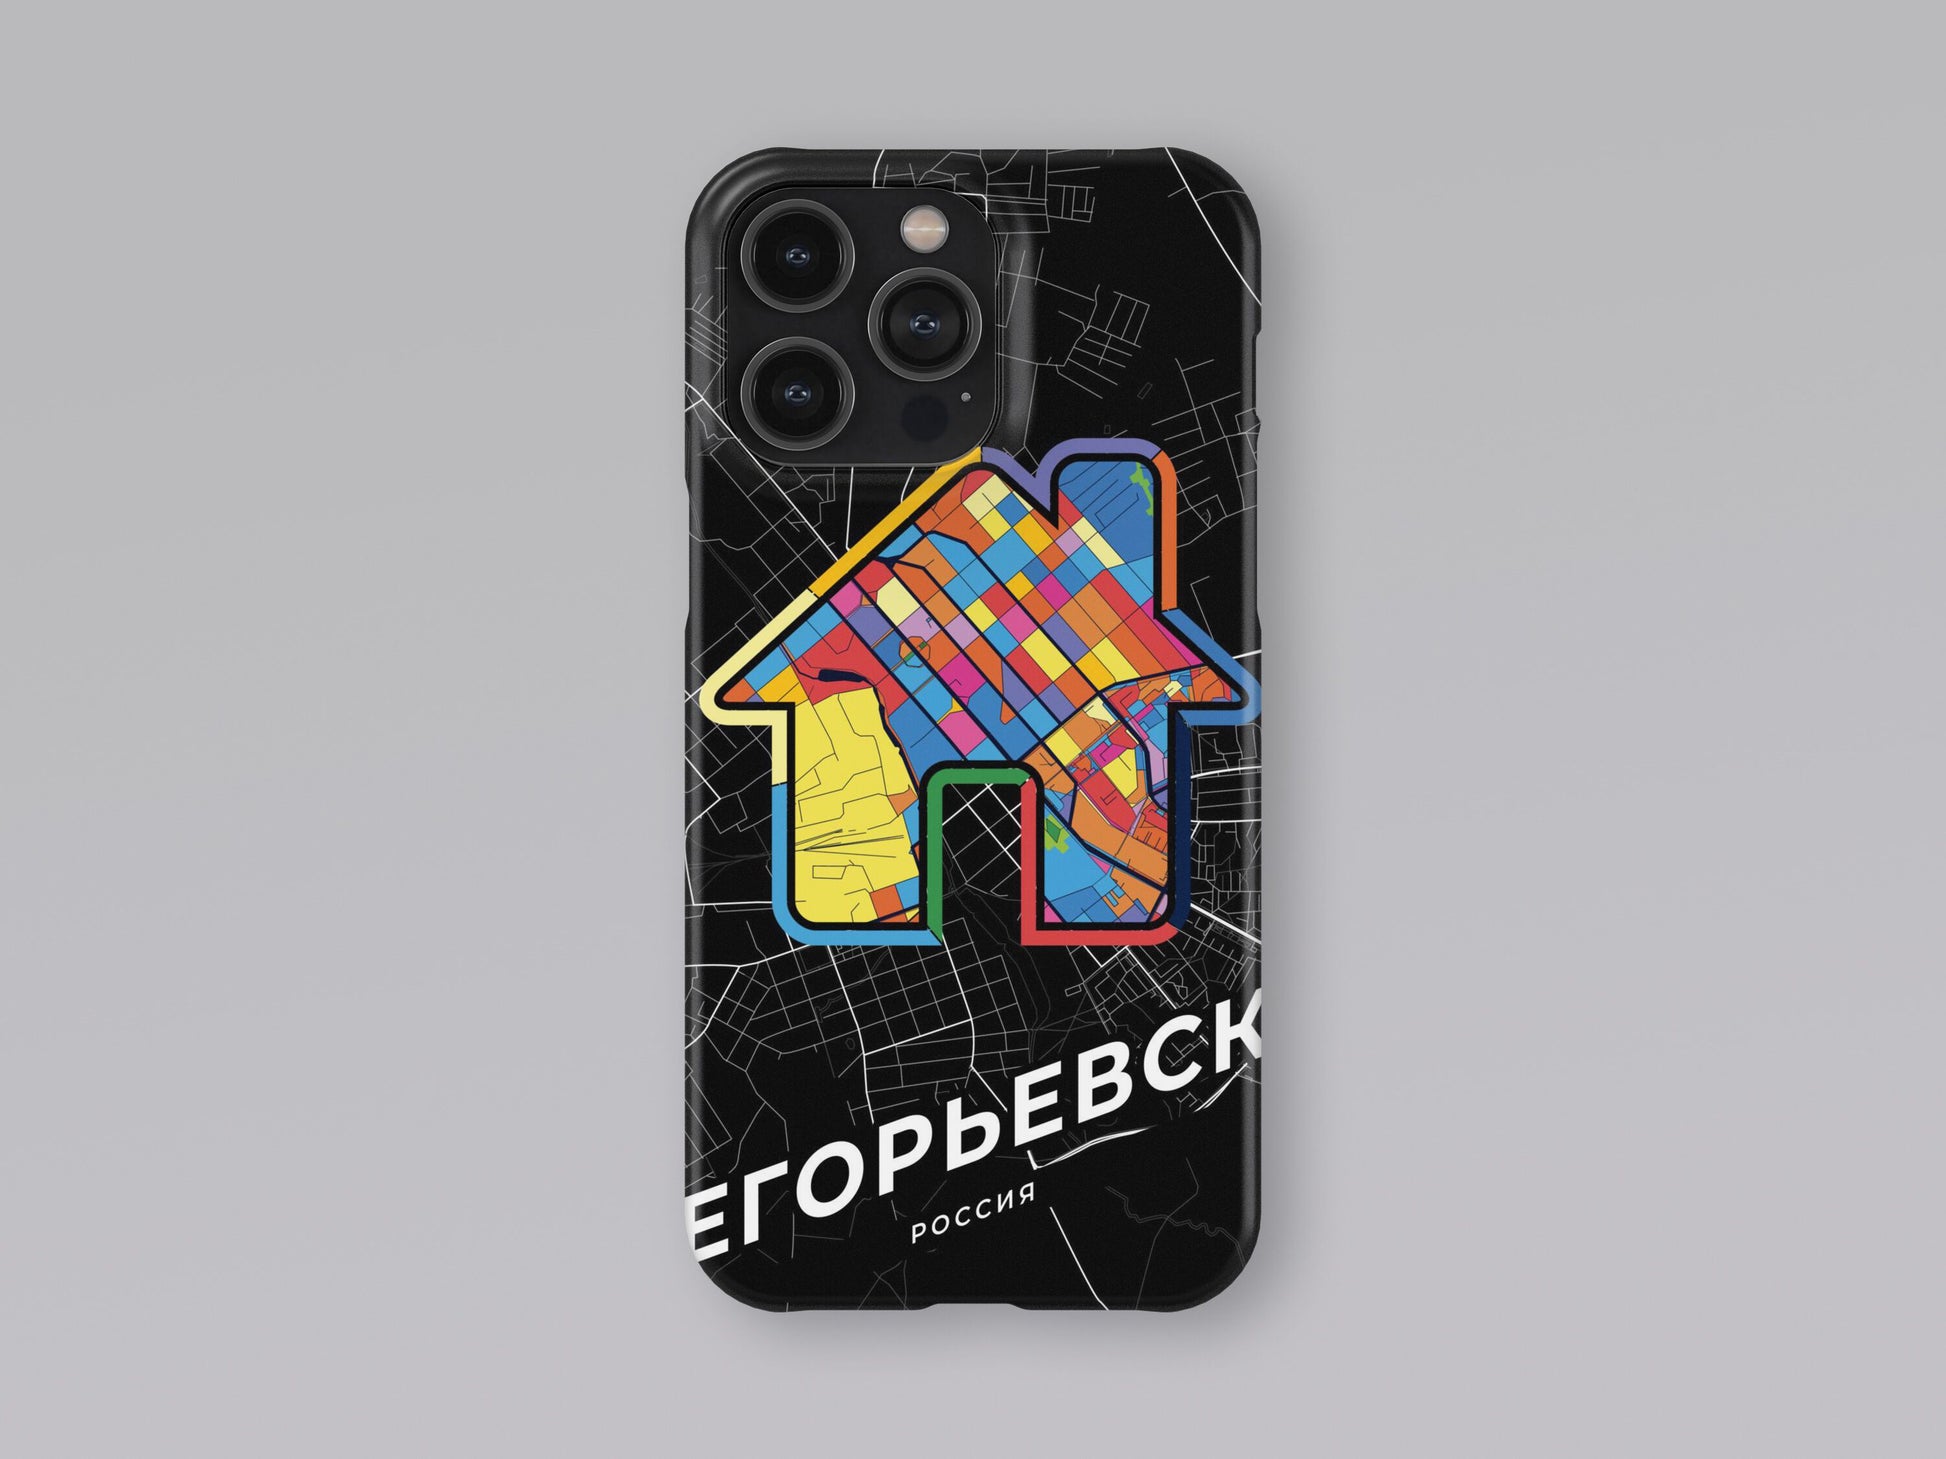 Yegoryevsk Russia slim phone case with colorful icon 3